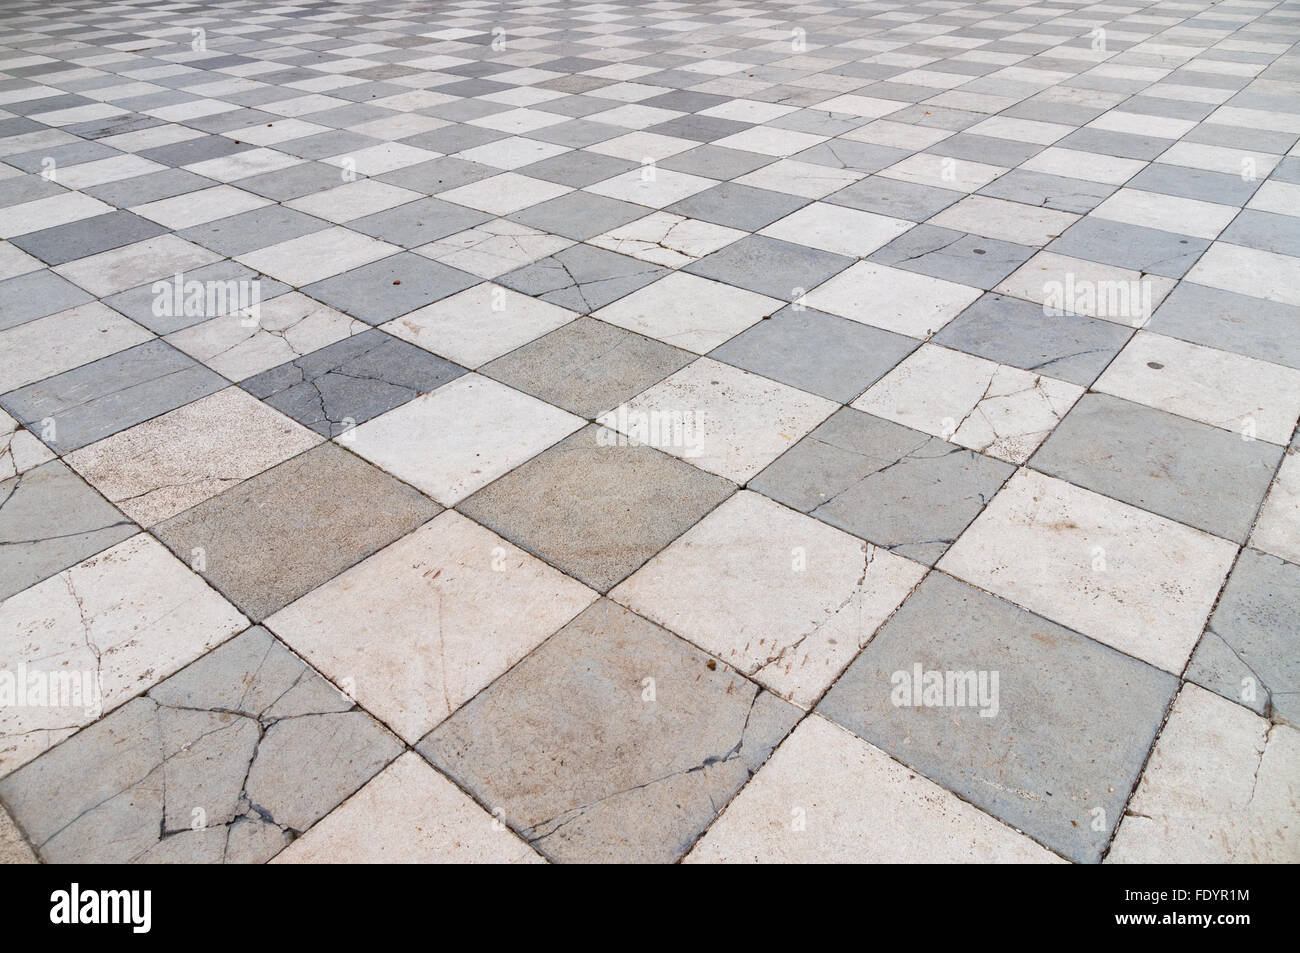 Old and partly cracked tiled floor, wide angle perspective view Stock Photo